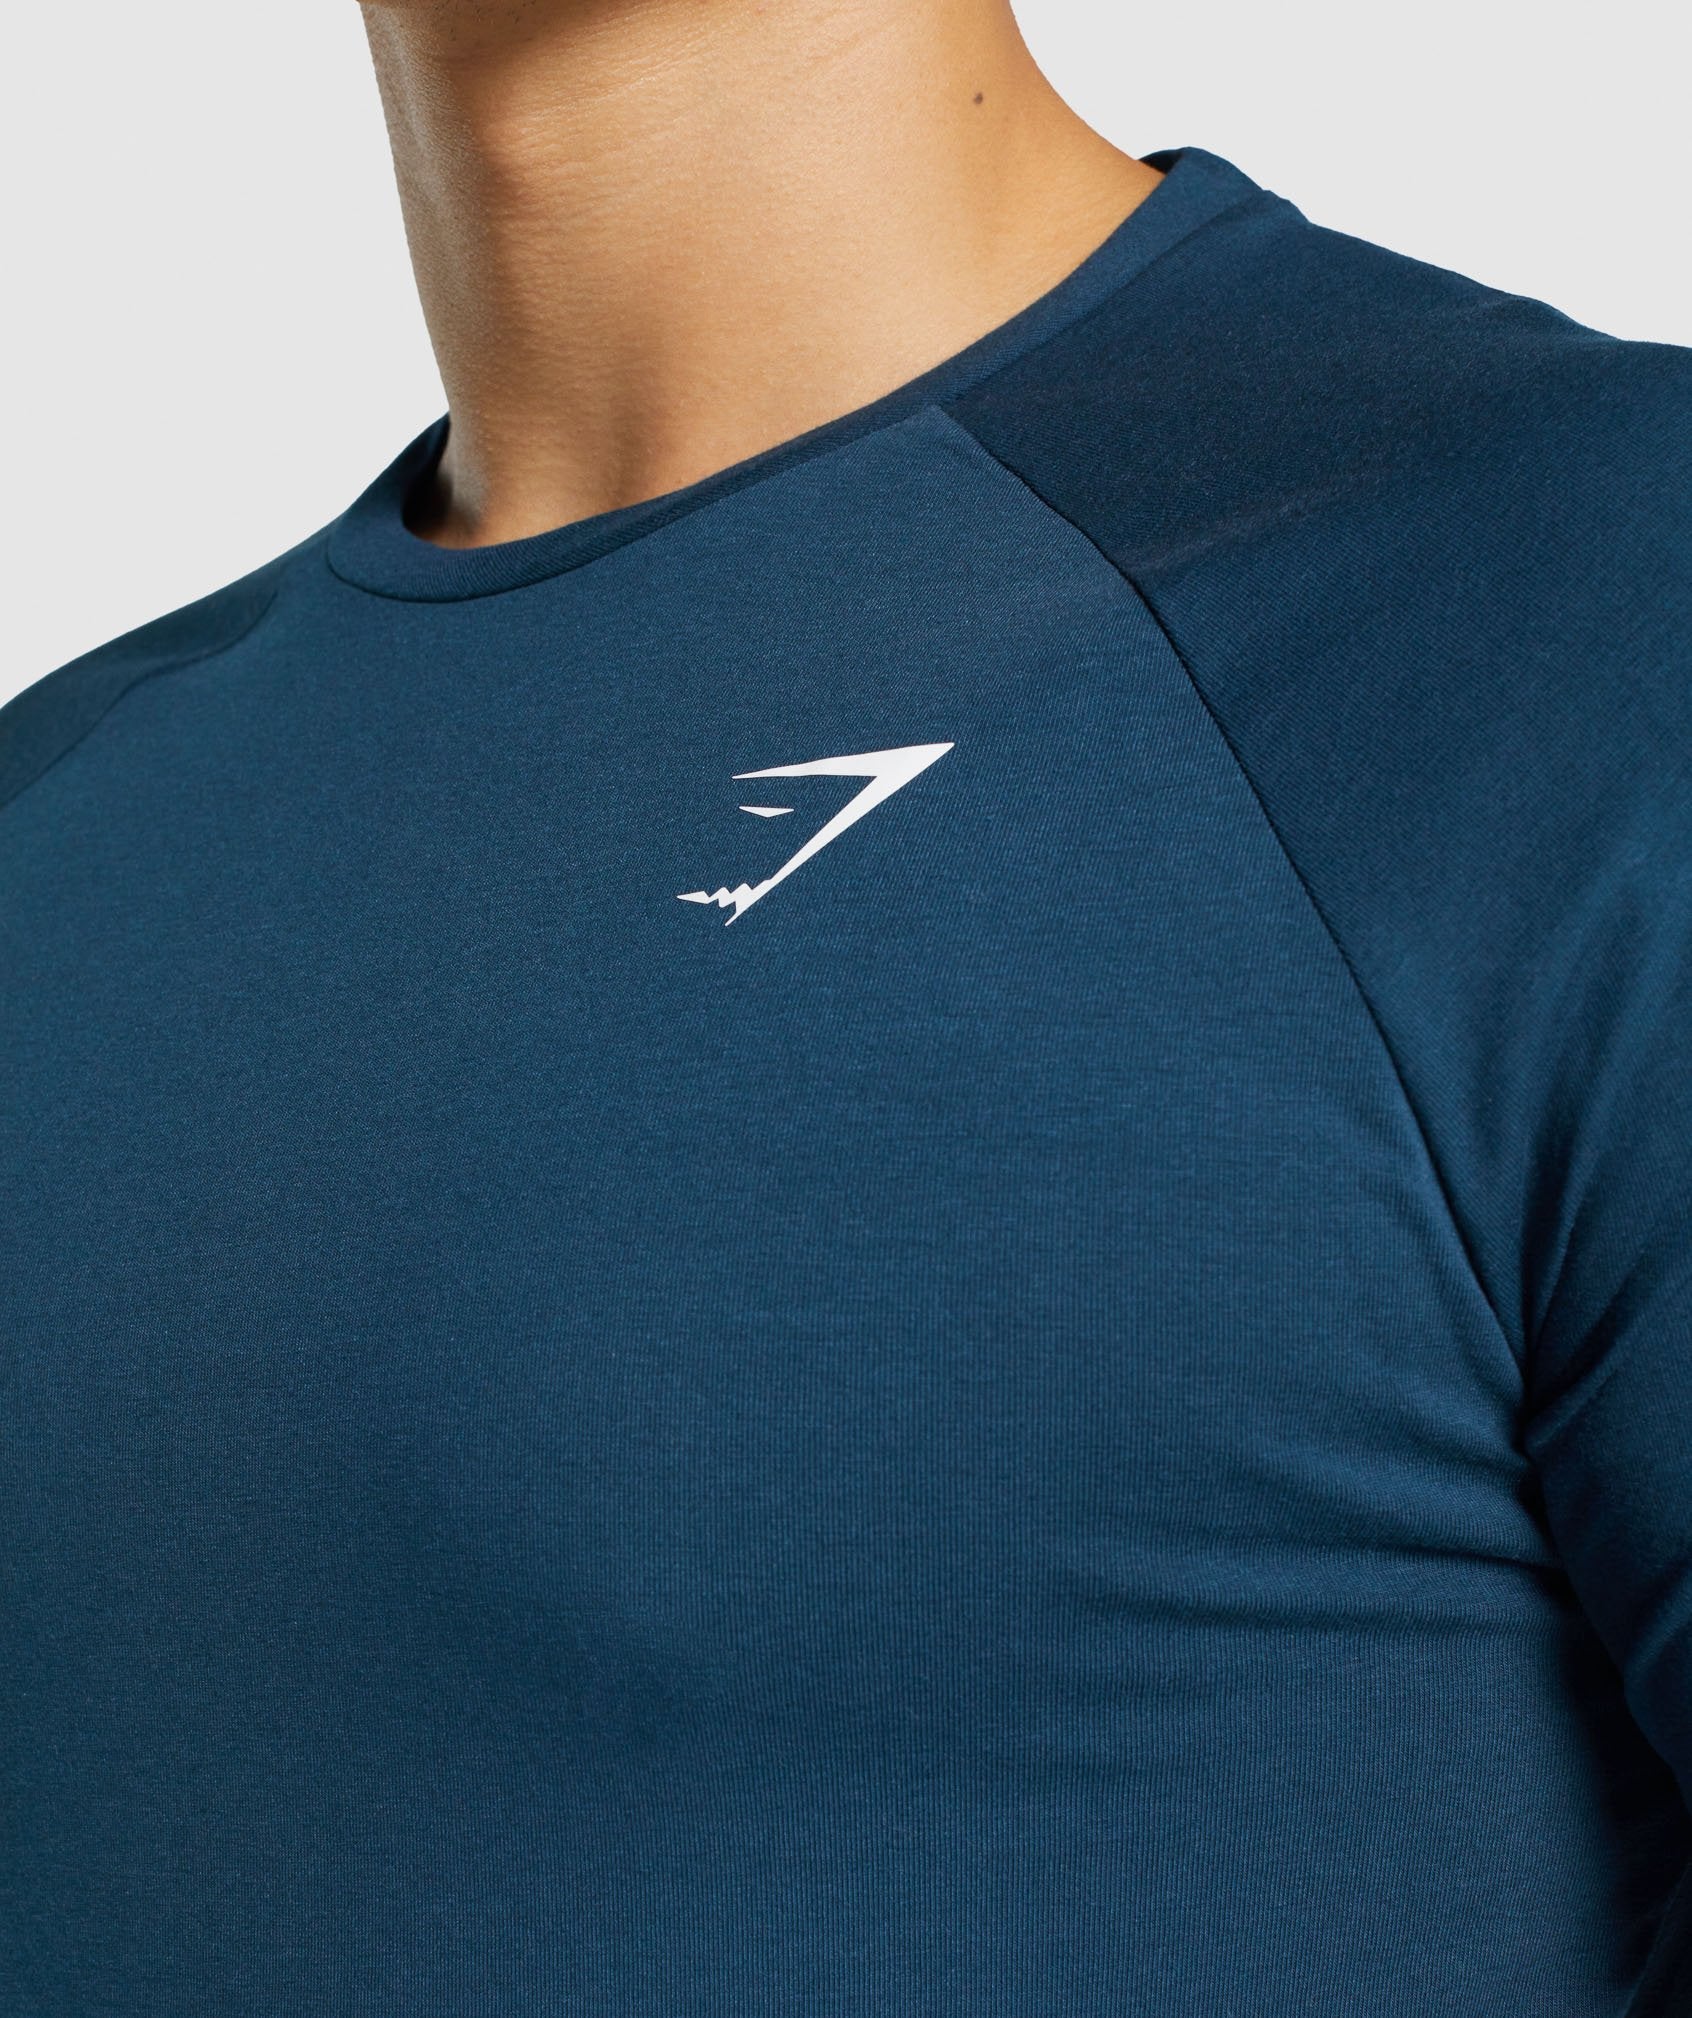 Critical 2.0 T-Shirt in Navy - view 6